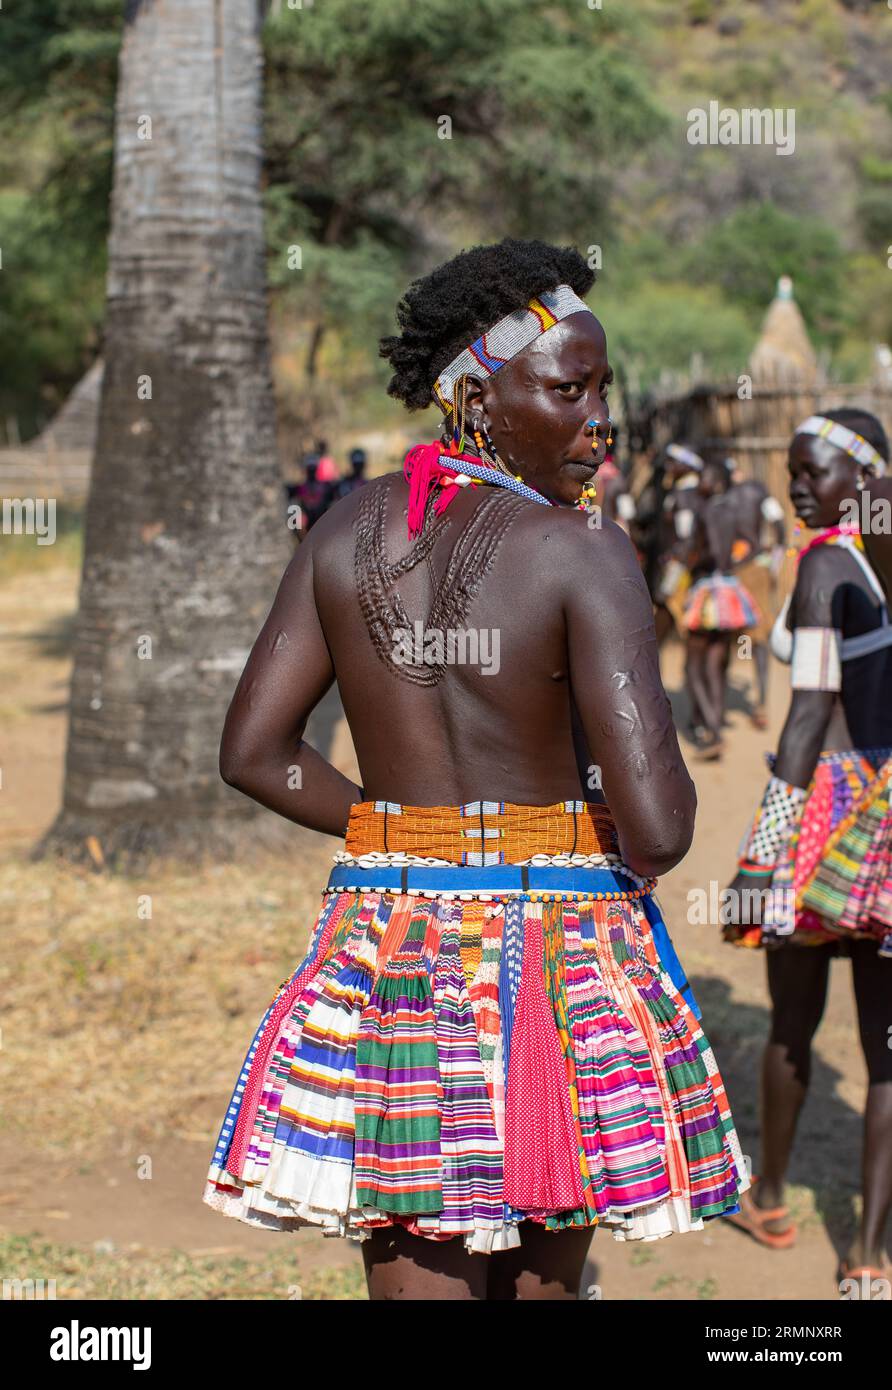 Woman from Larim tribe with scarification on her back Stock Photo